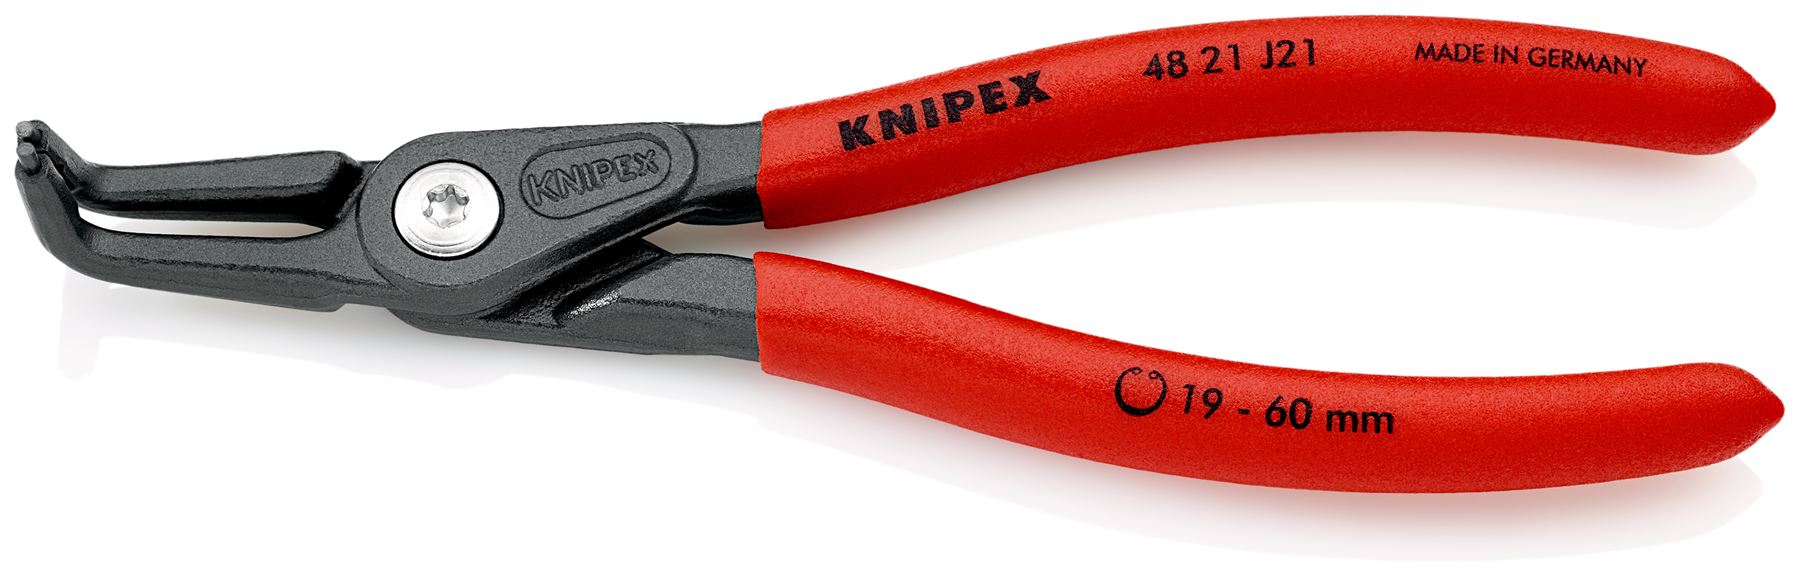 KNIPEX Precision Circlip Pliers for Internal Circlips in Bore Holes 90° Angled 165mm 1.8mm Diameter Tips 40 21 J21